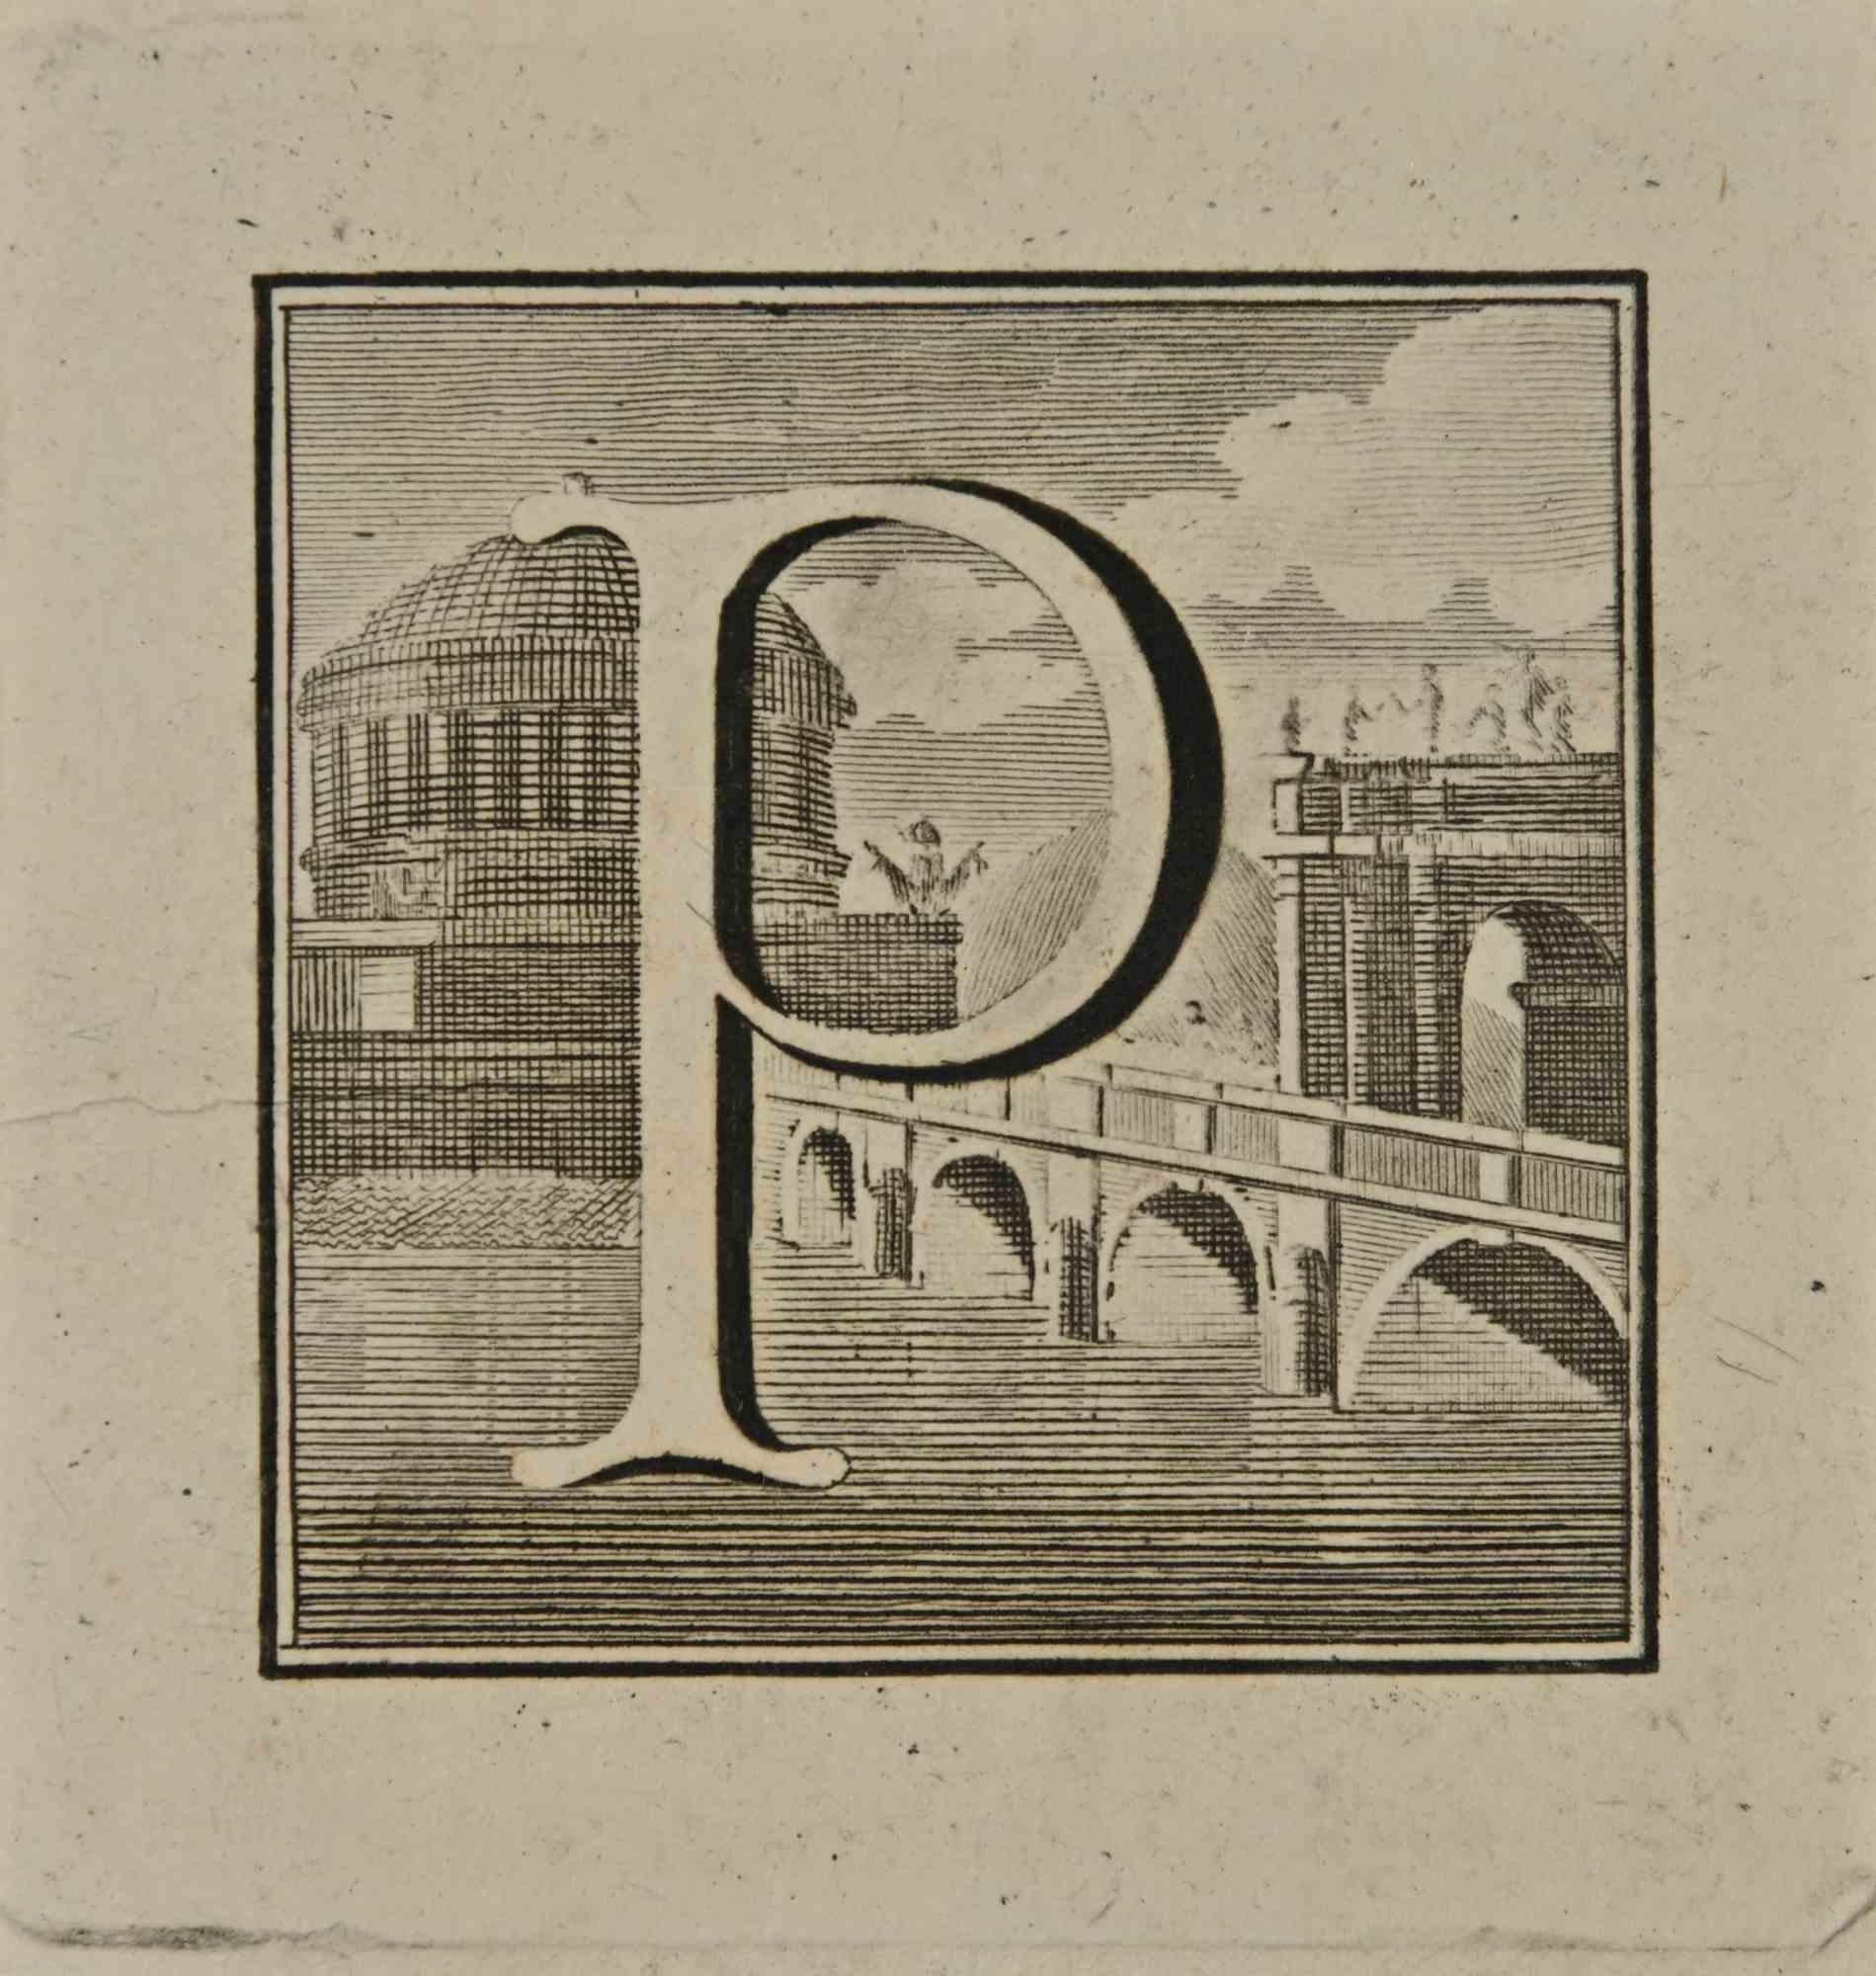 Letter of the Alphabet P,  from the series "Antiquities of Herculaneum", is an etching on paper realized by Luigi Vanvitelli in the 18th century.

Good conditions.

The etching belongs to the print suite “Antiquities of Herculaneum Exposed”